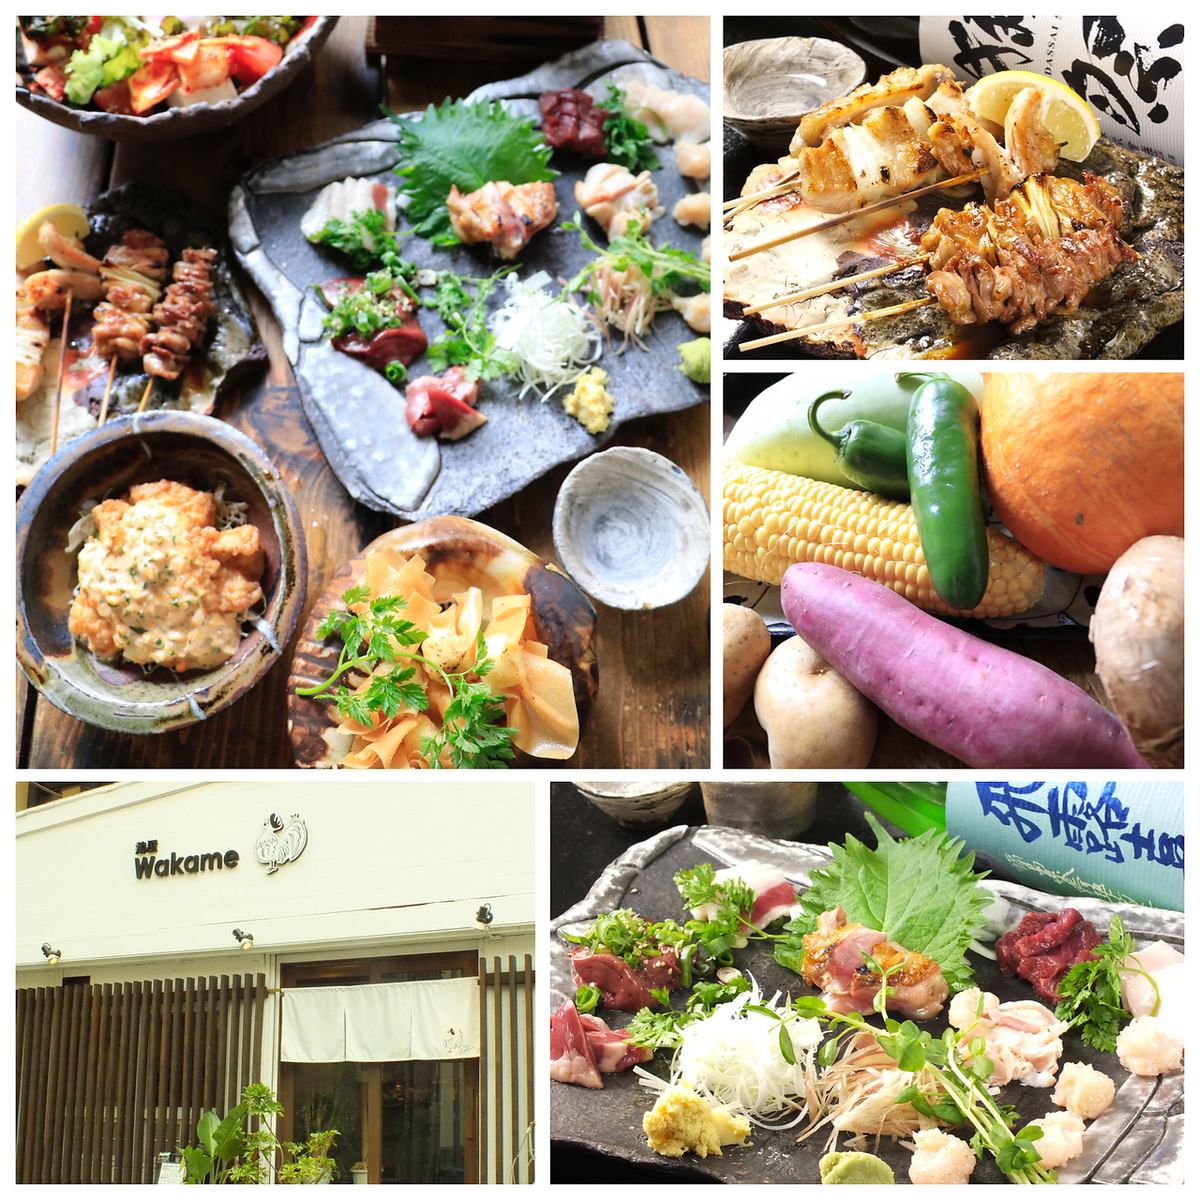 ◆ A yakitori restaurant where you can enjoy chicken, vegetables and specialties with a variety of sake at Otori Station ◆